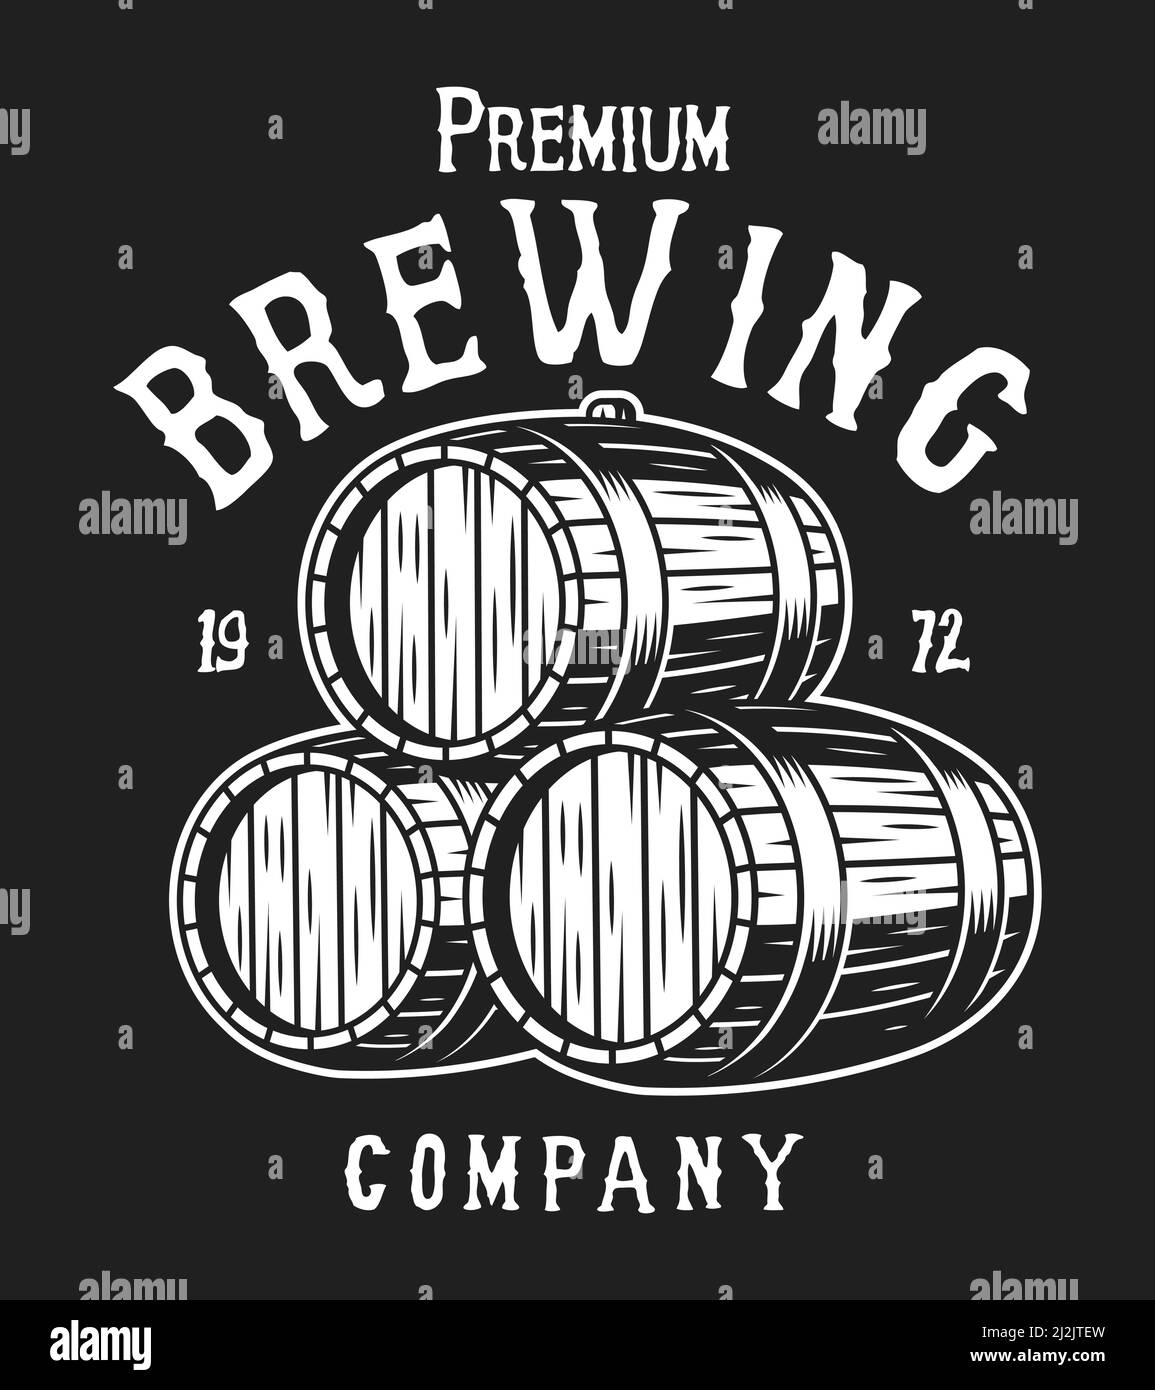 Vintage brewery white label concept with beer wooden barrels on black background isolated vector illustration Stock Vector